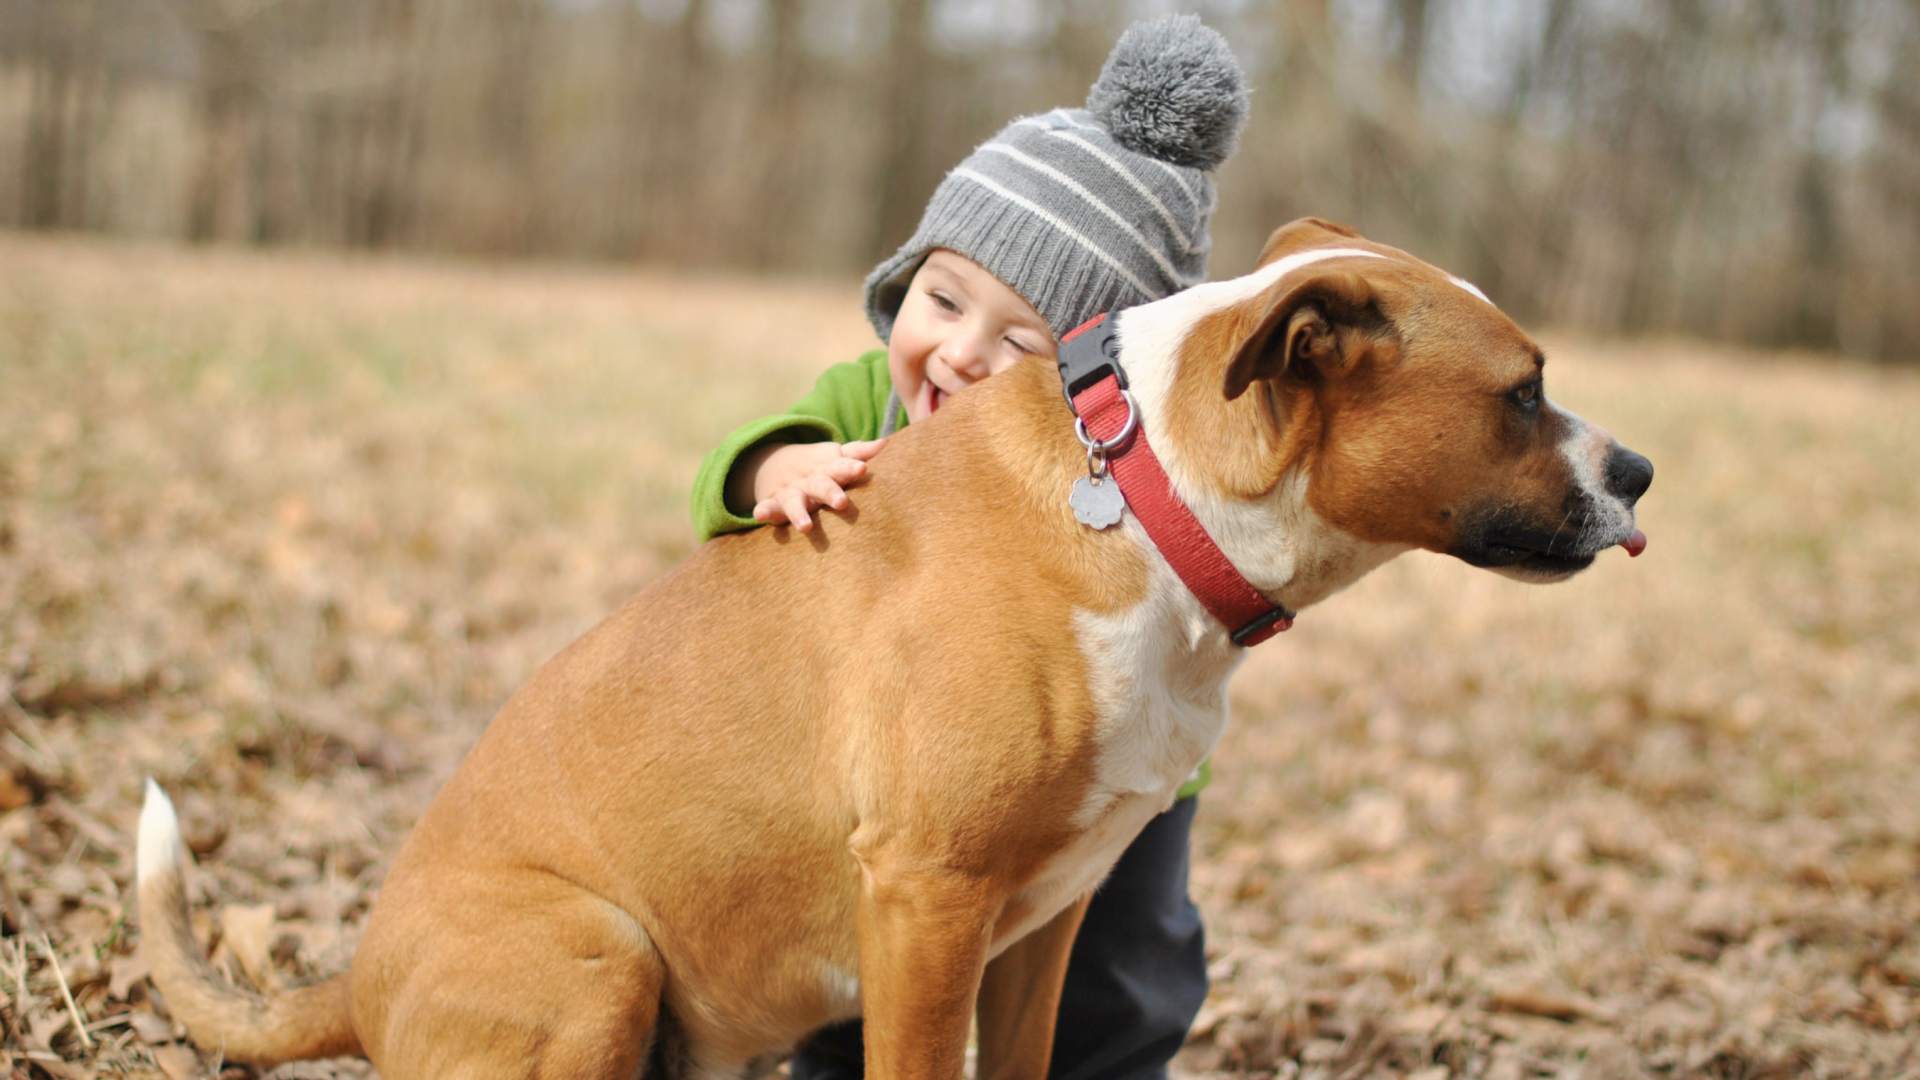 Child With His Dog Friend wallpaper 1920x1080